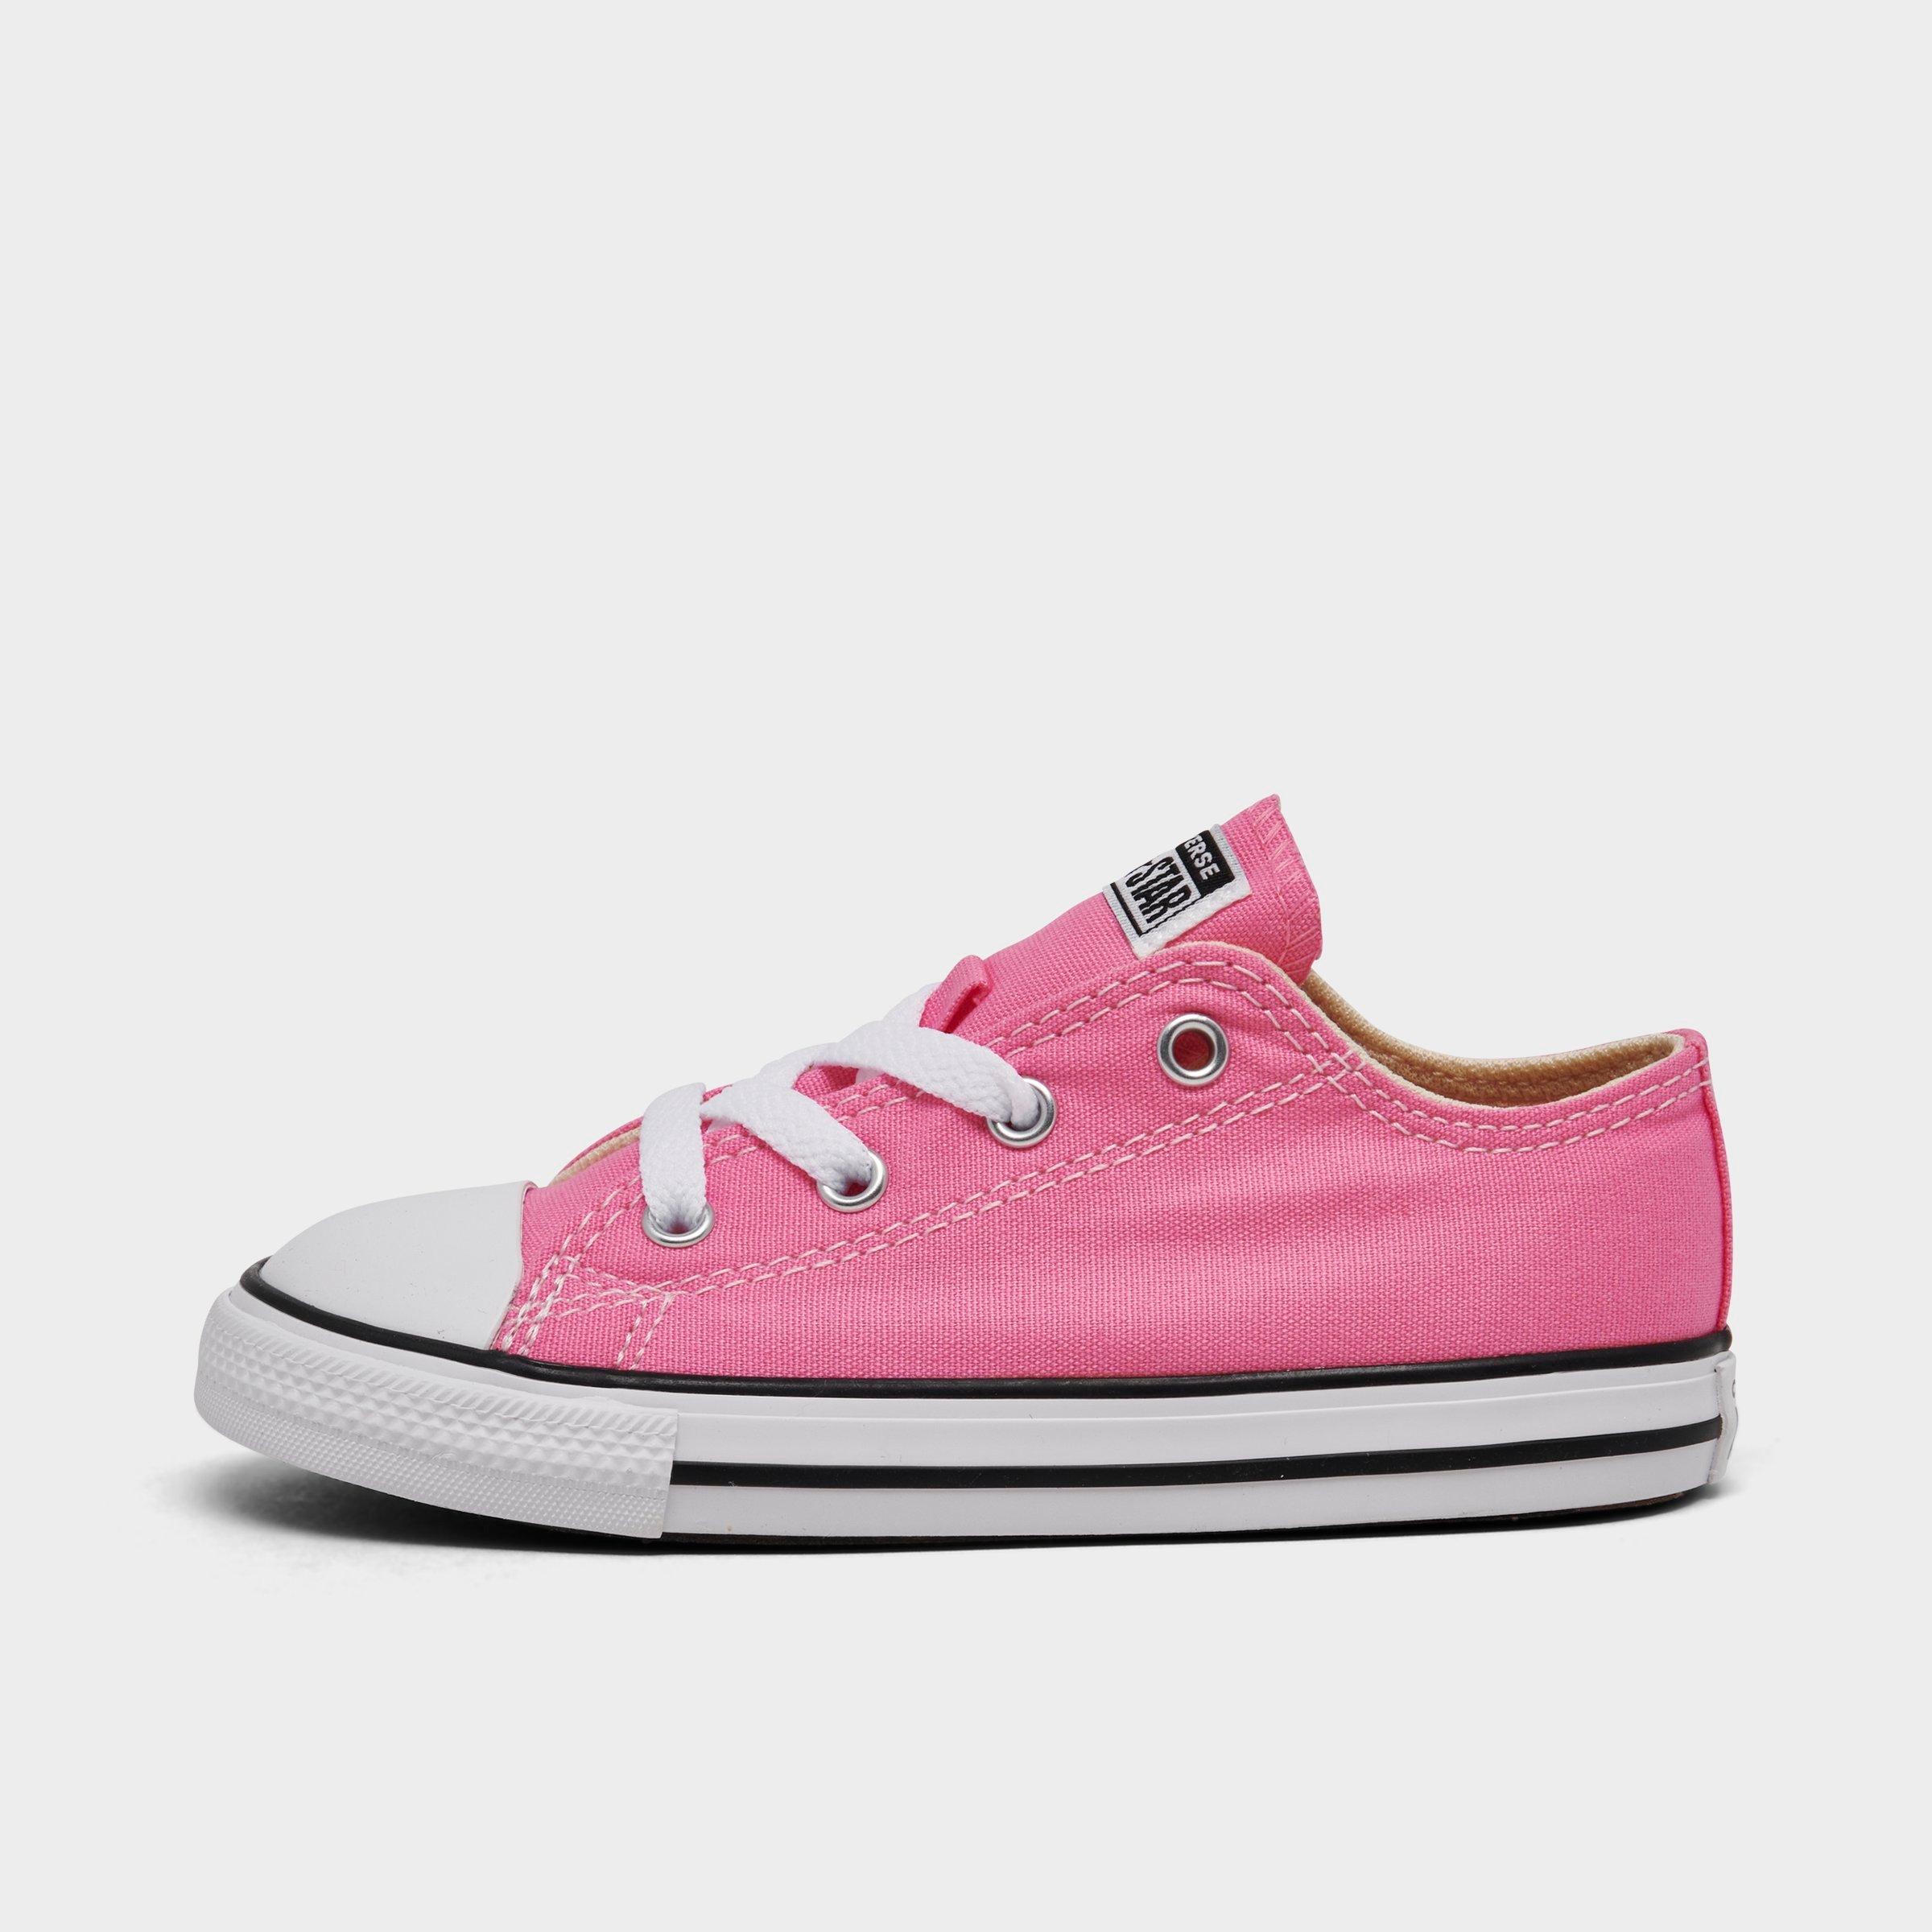 UPC 022866406369 product image for Converse Girls' Toddler Chuck Taylor Low Top Casual Shoes in Pink/Pink Size 8.0  | upcitemdb.com